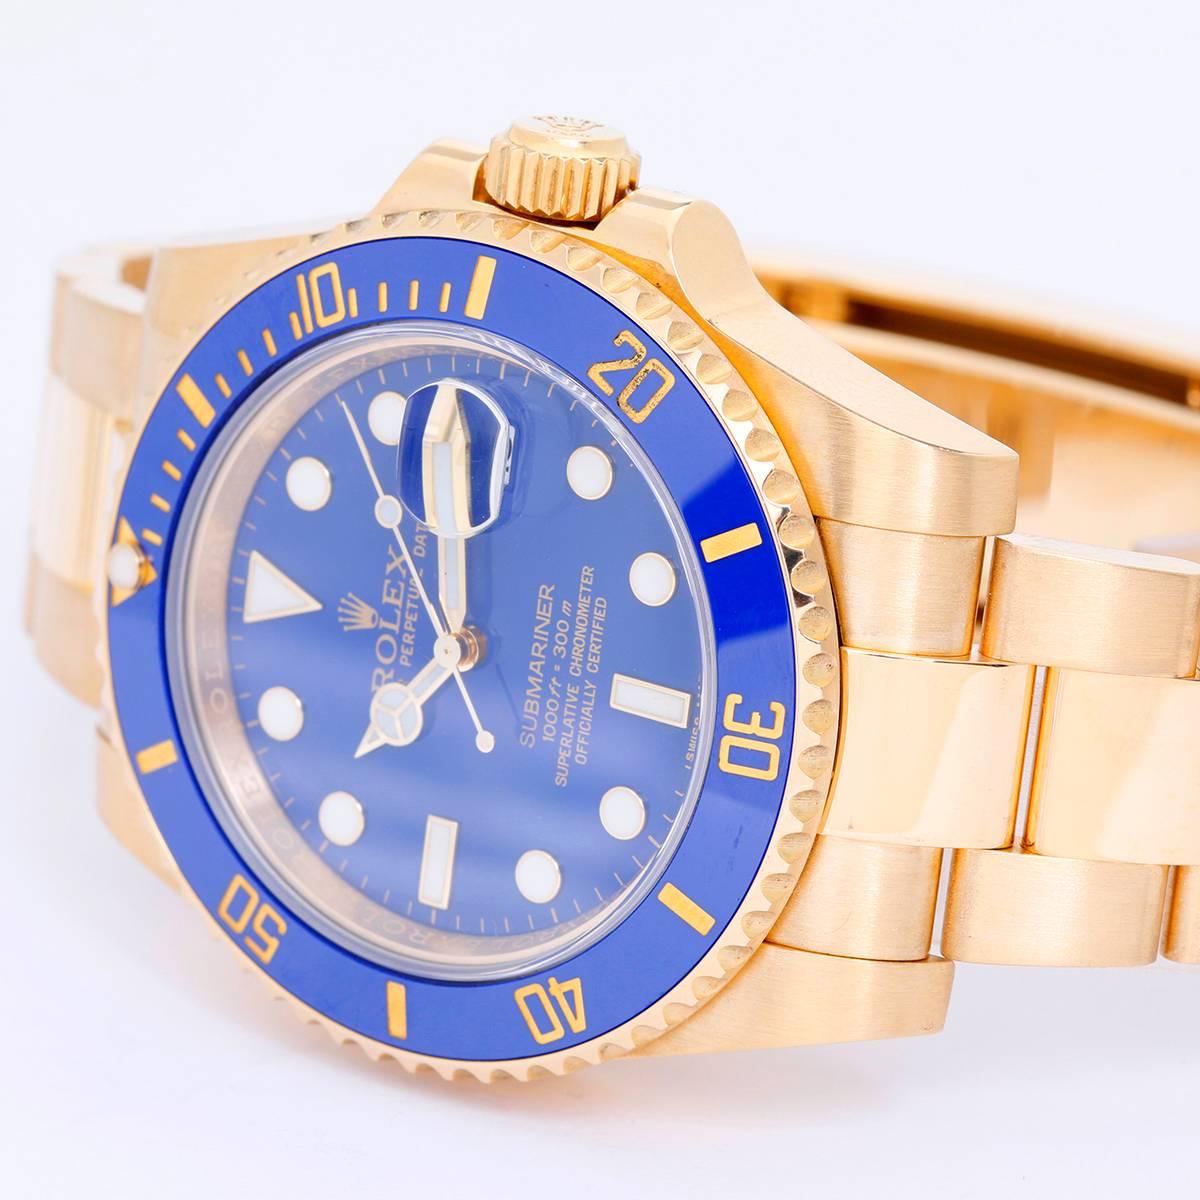 Rolex Submariner 18k Gold Men's Watch 116618 Blue Dial -  Automatic winding, 31 jewels, Quickset, sapphire crystal. 18k yellow gold case with rotating bezel with blue insert (40mm diameter). Blue dial with white hour markers. 18k yellow gold Oyster